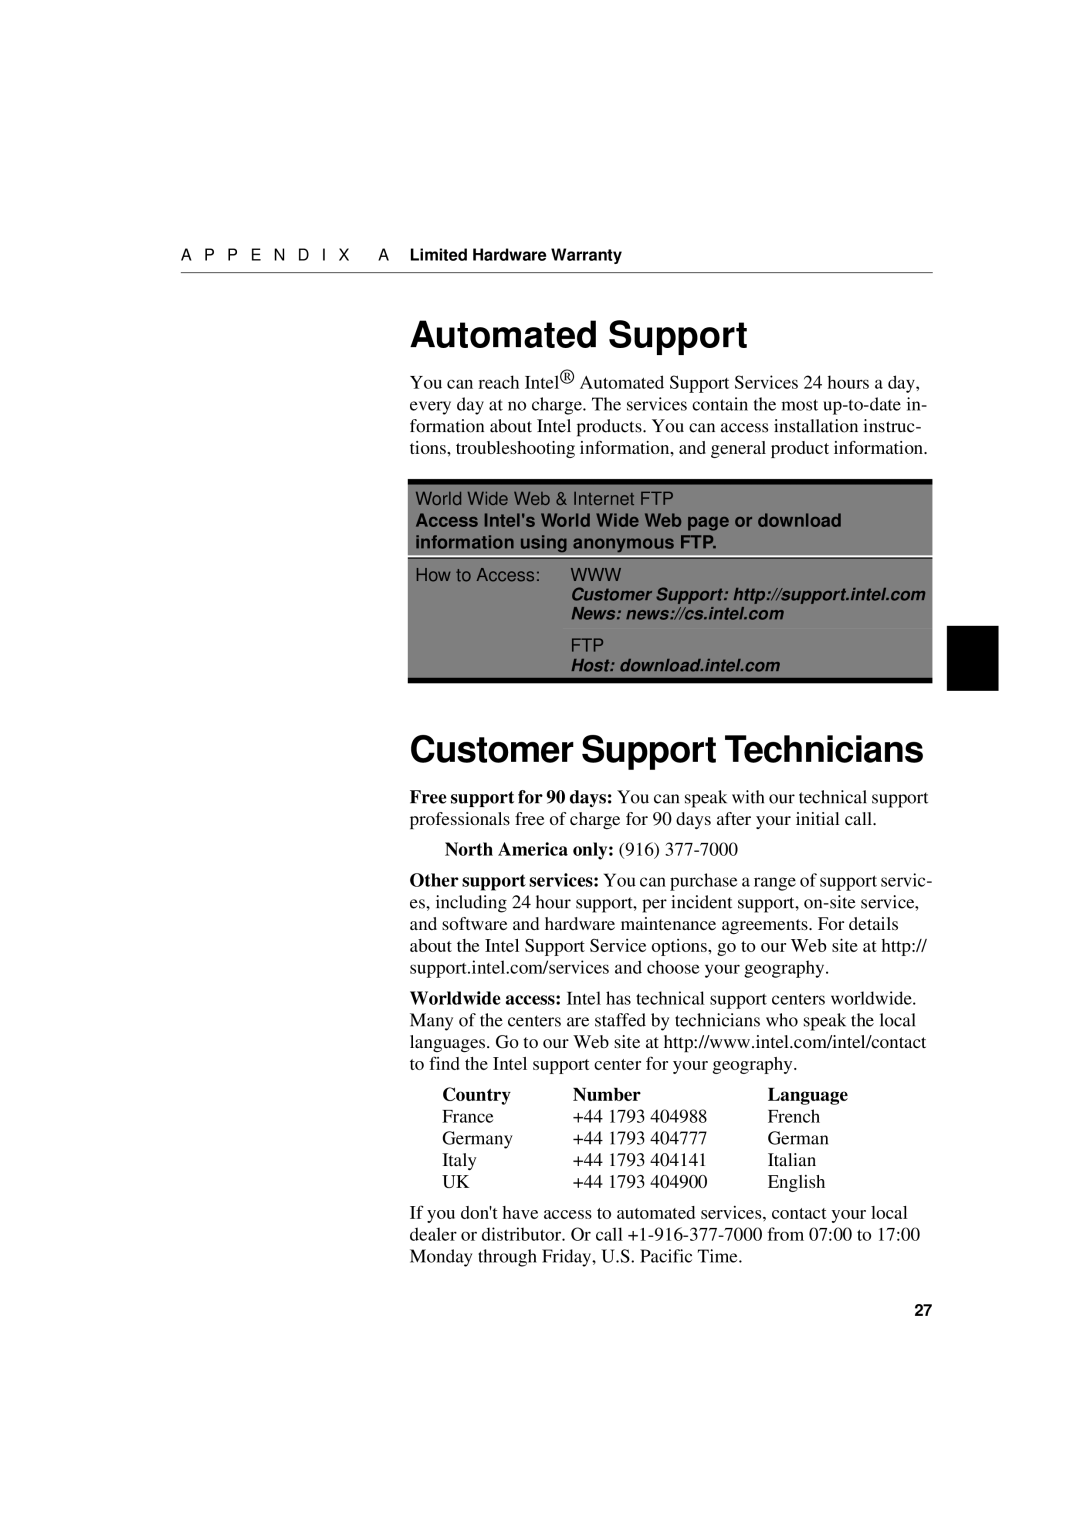 Intel 1000SX, 1000LX manual Automated Support, Customer Support Technicians, North America only, Country, Number 